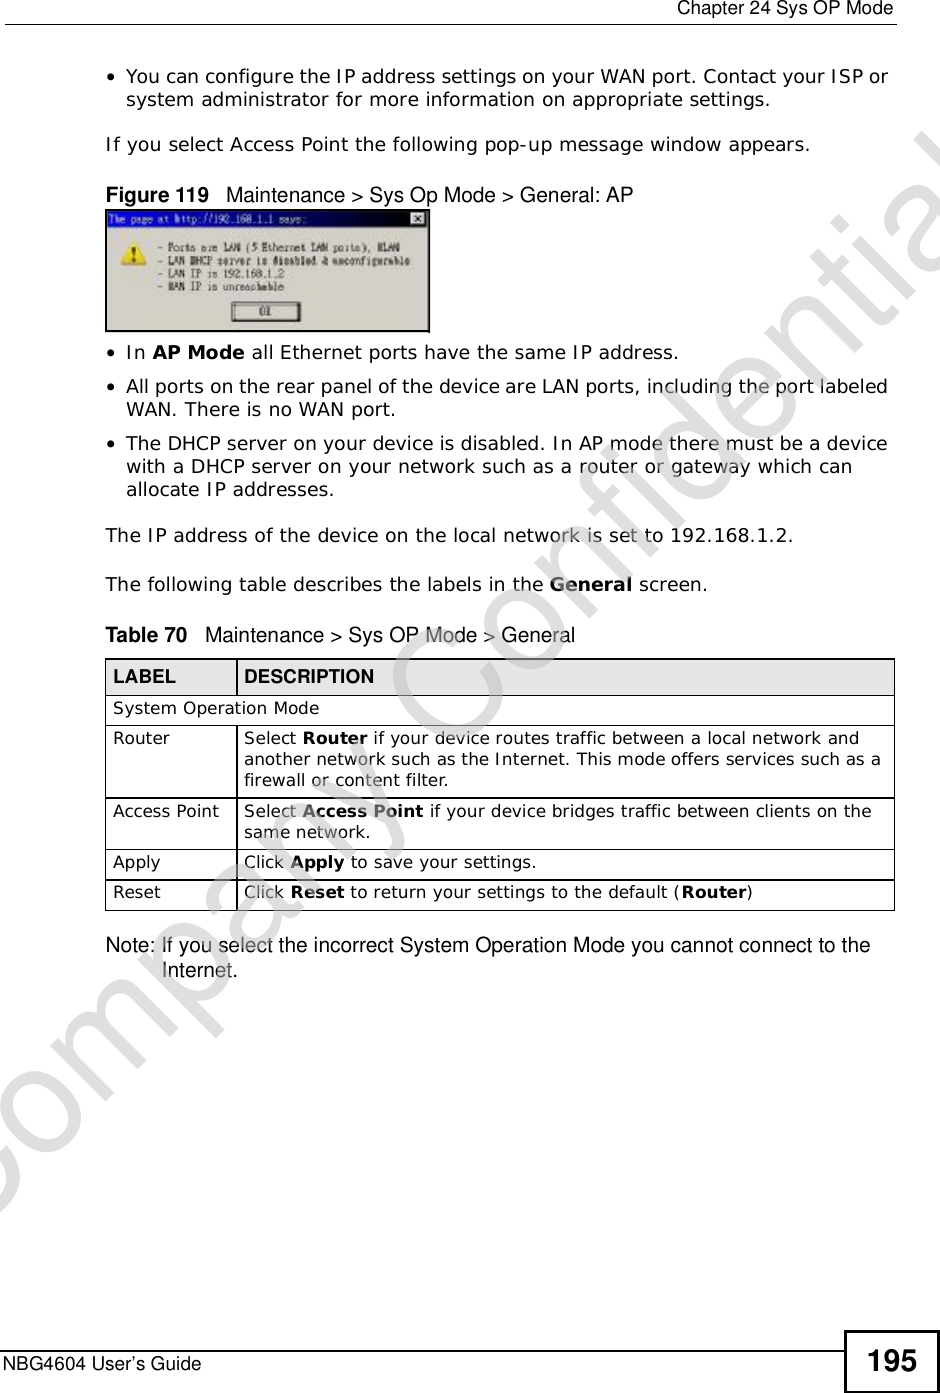  Chapter 24Sys OP ModeNBG4604 User’s Guide 195•You can configure the IP address settings on your WAN port. Contact your ISP or system administrator for more information on appropriate settings.If you select Access Point the following pop-up message window appears.Figure 119   Maintenance &gt; Sys Op Mode &gt; General: AP •In AP Mode all Ethernet ports have the same IP address. •All ports on the rear panel of the device are LAN ports, including the port labeled WAN. There is no WAN port.•The DHCP server on your device is disabled. In AP mode there must be a device with a DHCP server on your network such as a router or gateway which can allocate IP addresses.The IP address of the device on the local network is set to 192.168.1.2.The following table describes the labels in the General screen.Table 70   Maintenance &gt; Sys OP Mode &gt; General Note: If you select the incorrect System Operation Mode you cannot connect to the Internet.LABEL DESCRIPTIONSystem Operation ModeRouter  Select Router if your device routes traffic between a local network and another network such as the Internet. This mode offers services such as a firewall or content filter.Access Point Select Access Point if your device bridges traffic between clients on the same network.Apply Click Apply to save your settings.Reset Click Reset to return your settings to the default (Router)Company Confidential